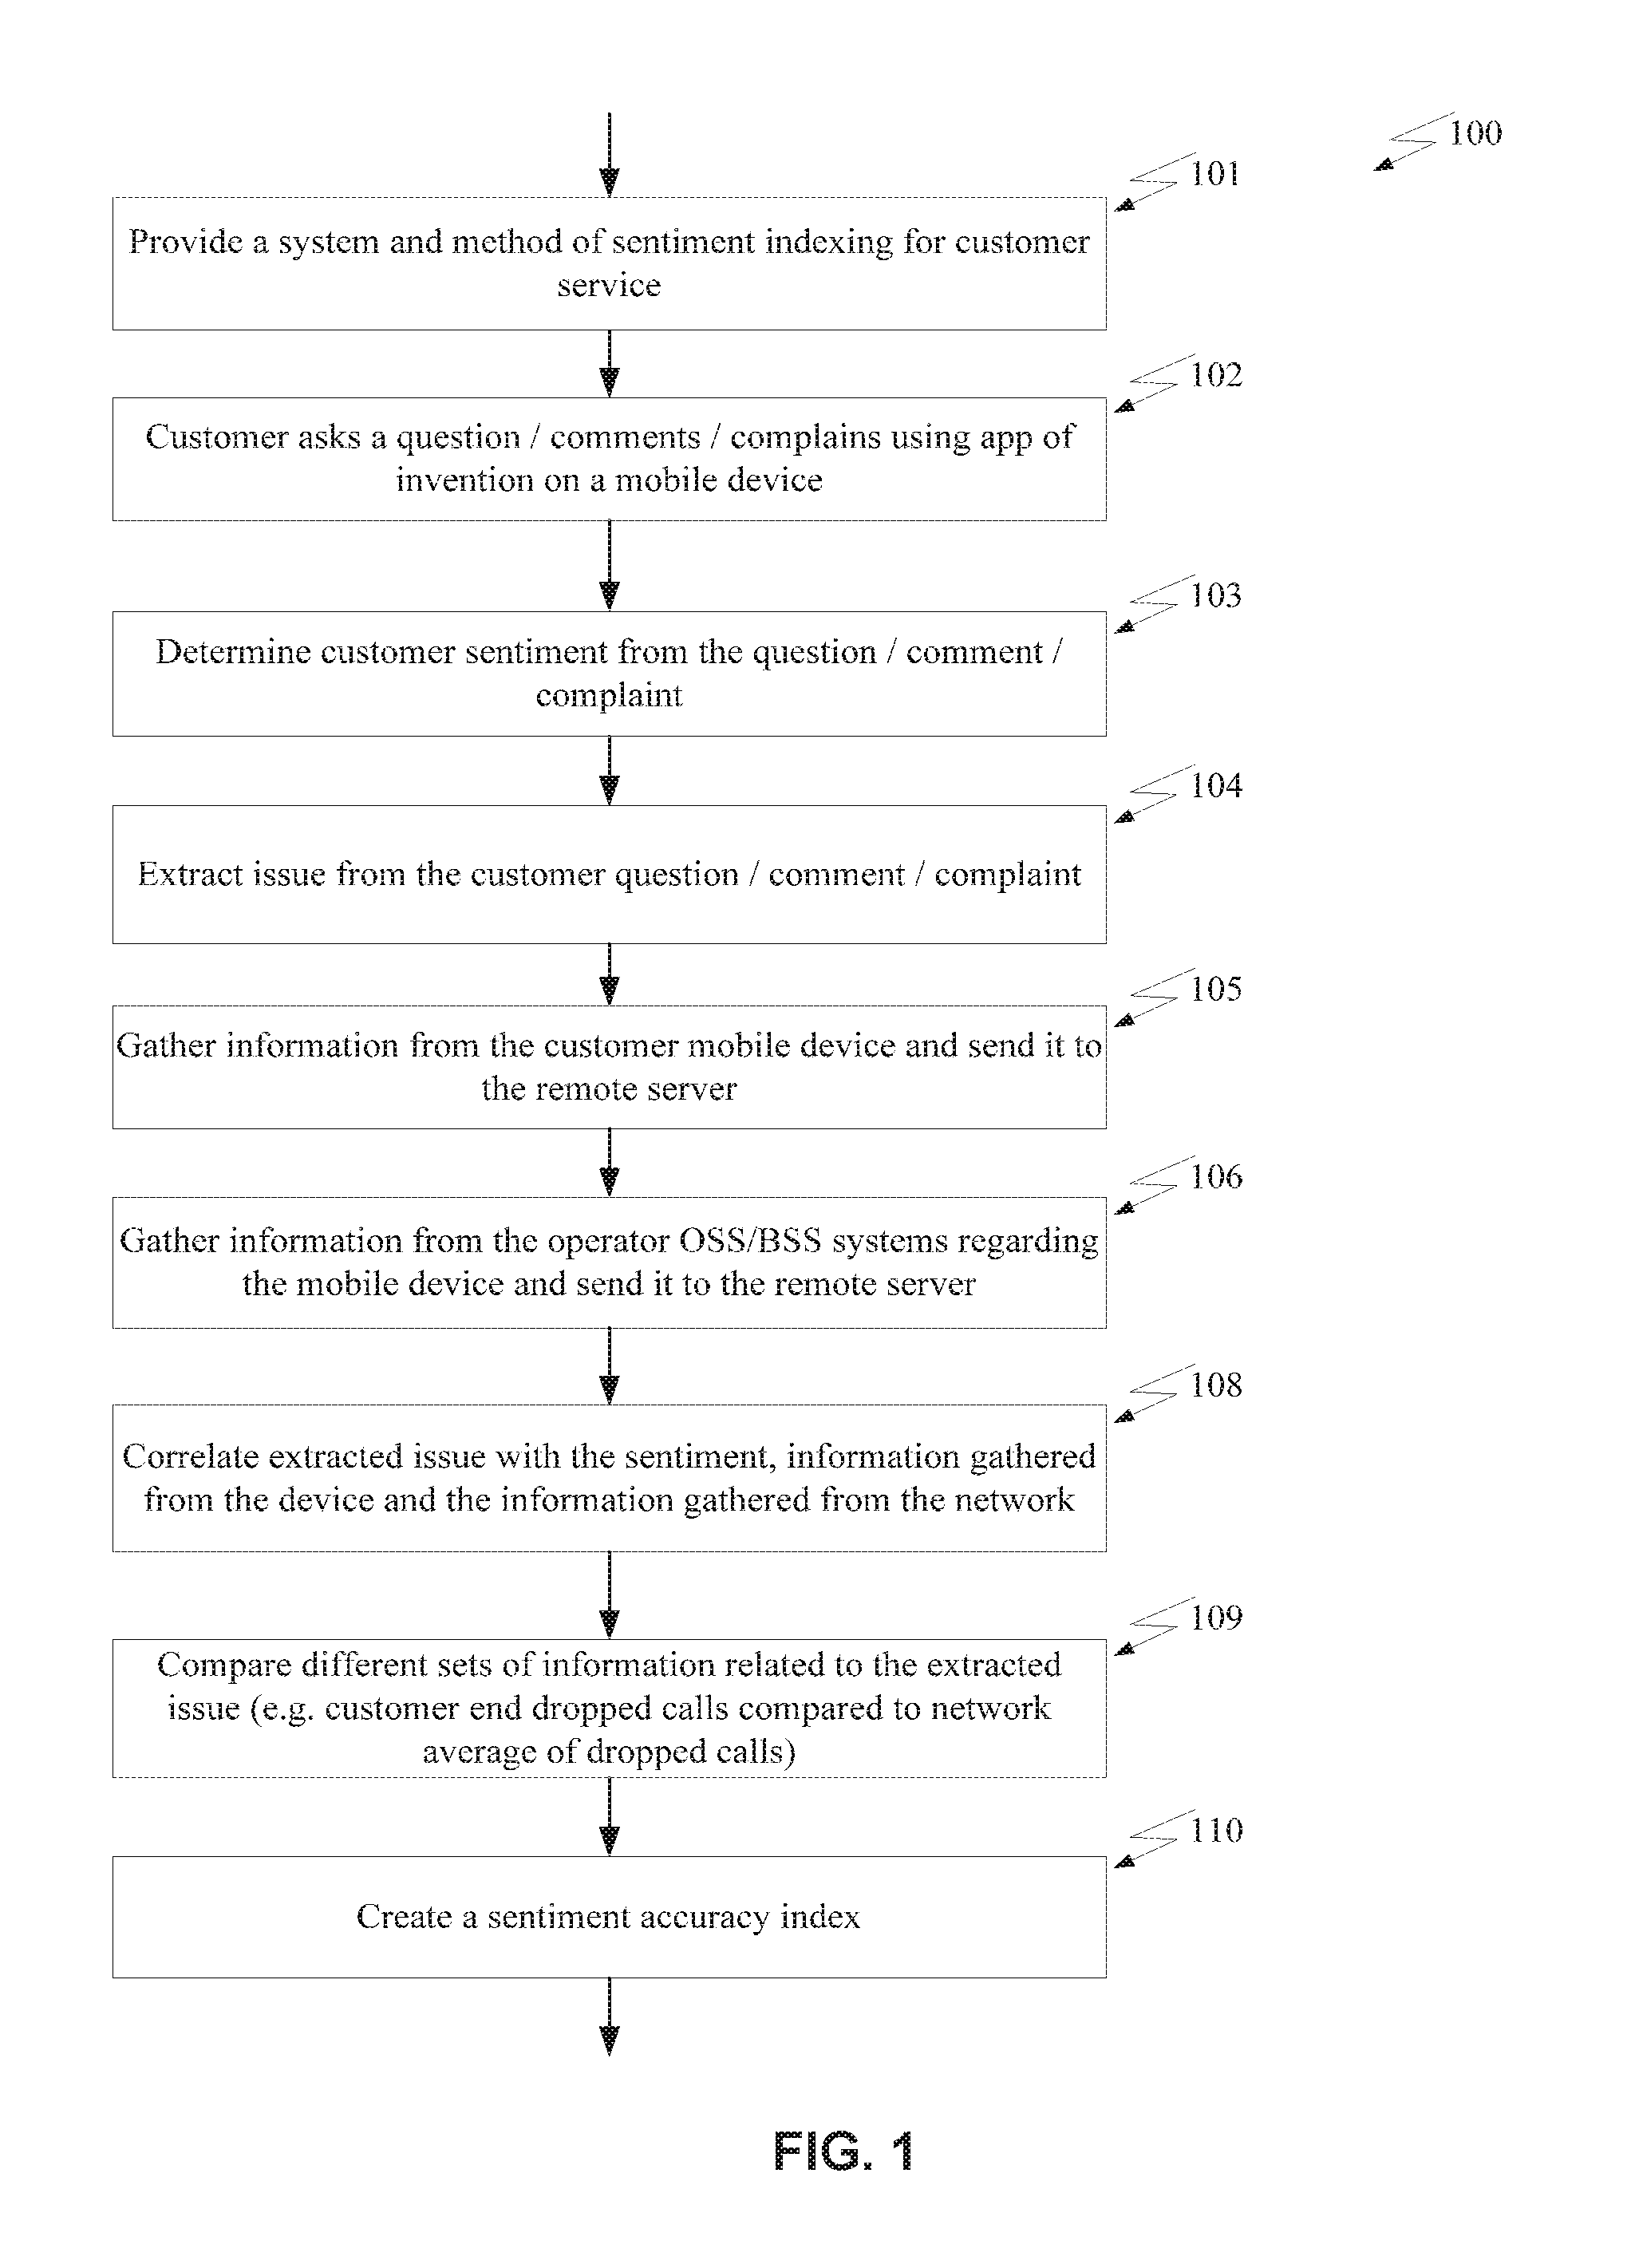 System and method of sentiment accuracy indexing for customer service